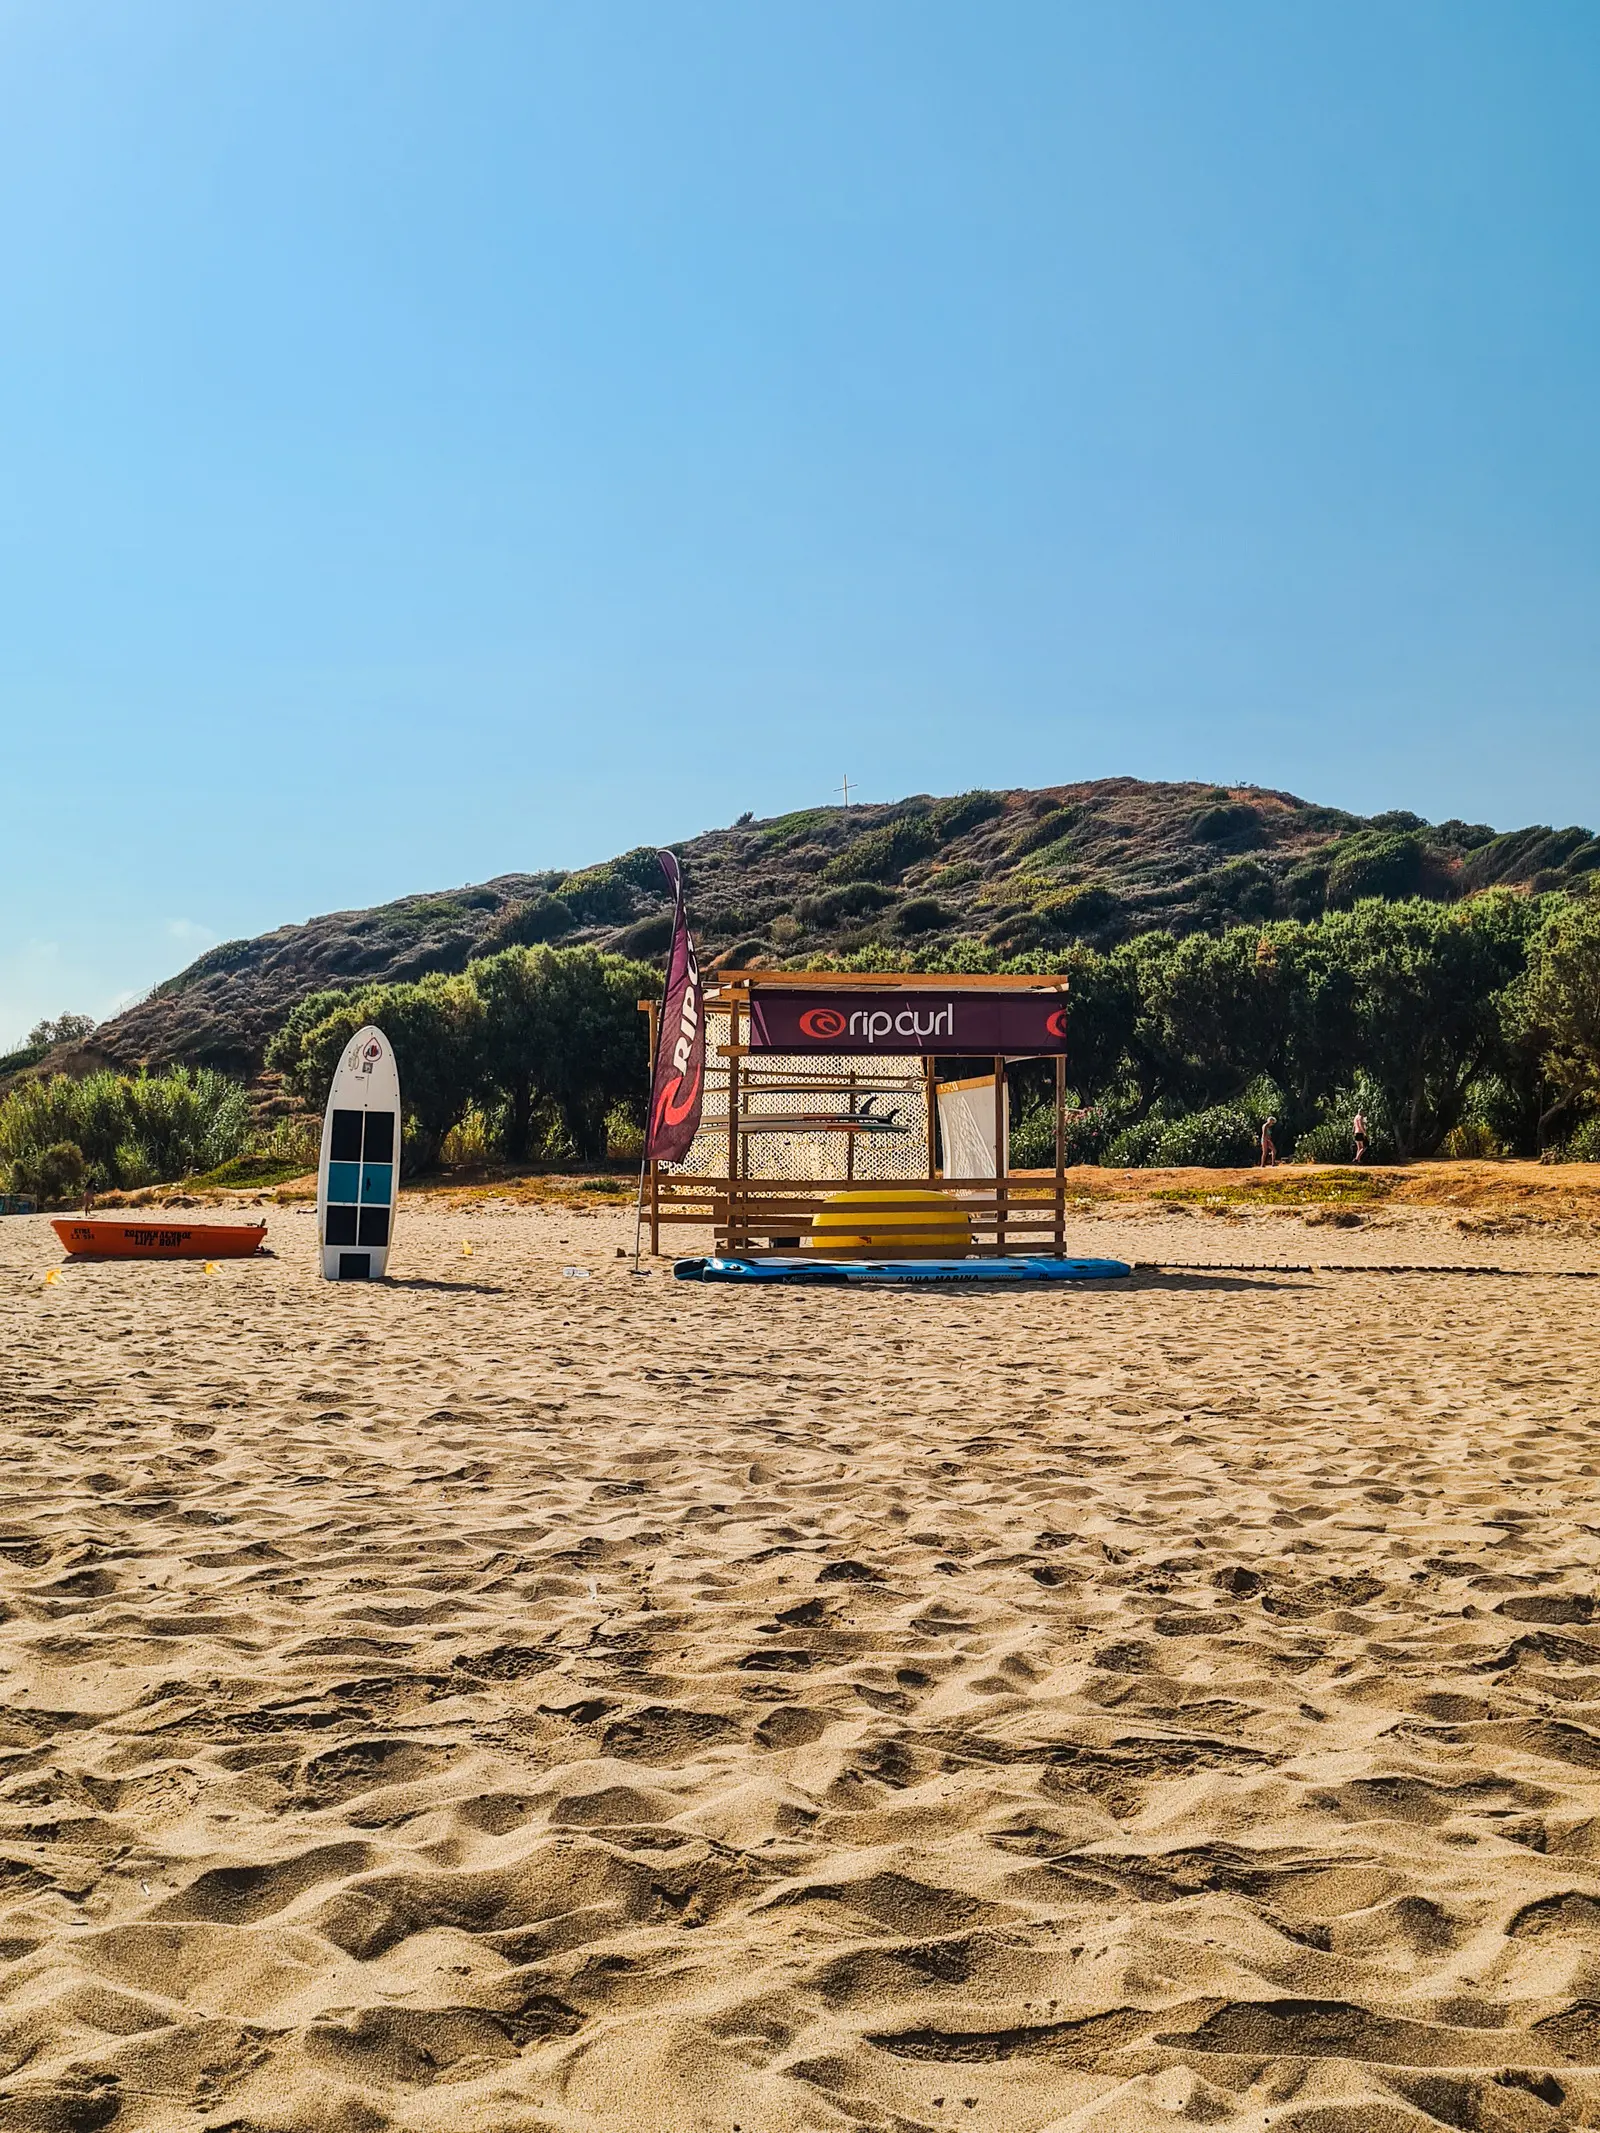 A black and white surfboard and a Rip Curl surfboard shack standing in golden sand in front of a small hill covered in greenery on Golden Beach, one of the closest beaches to Chania.